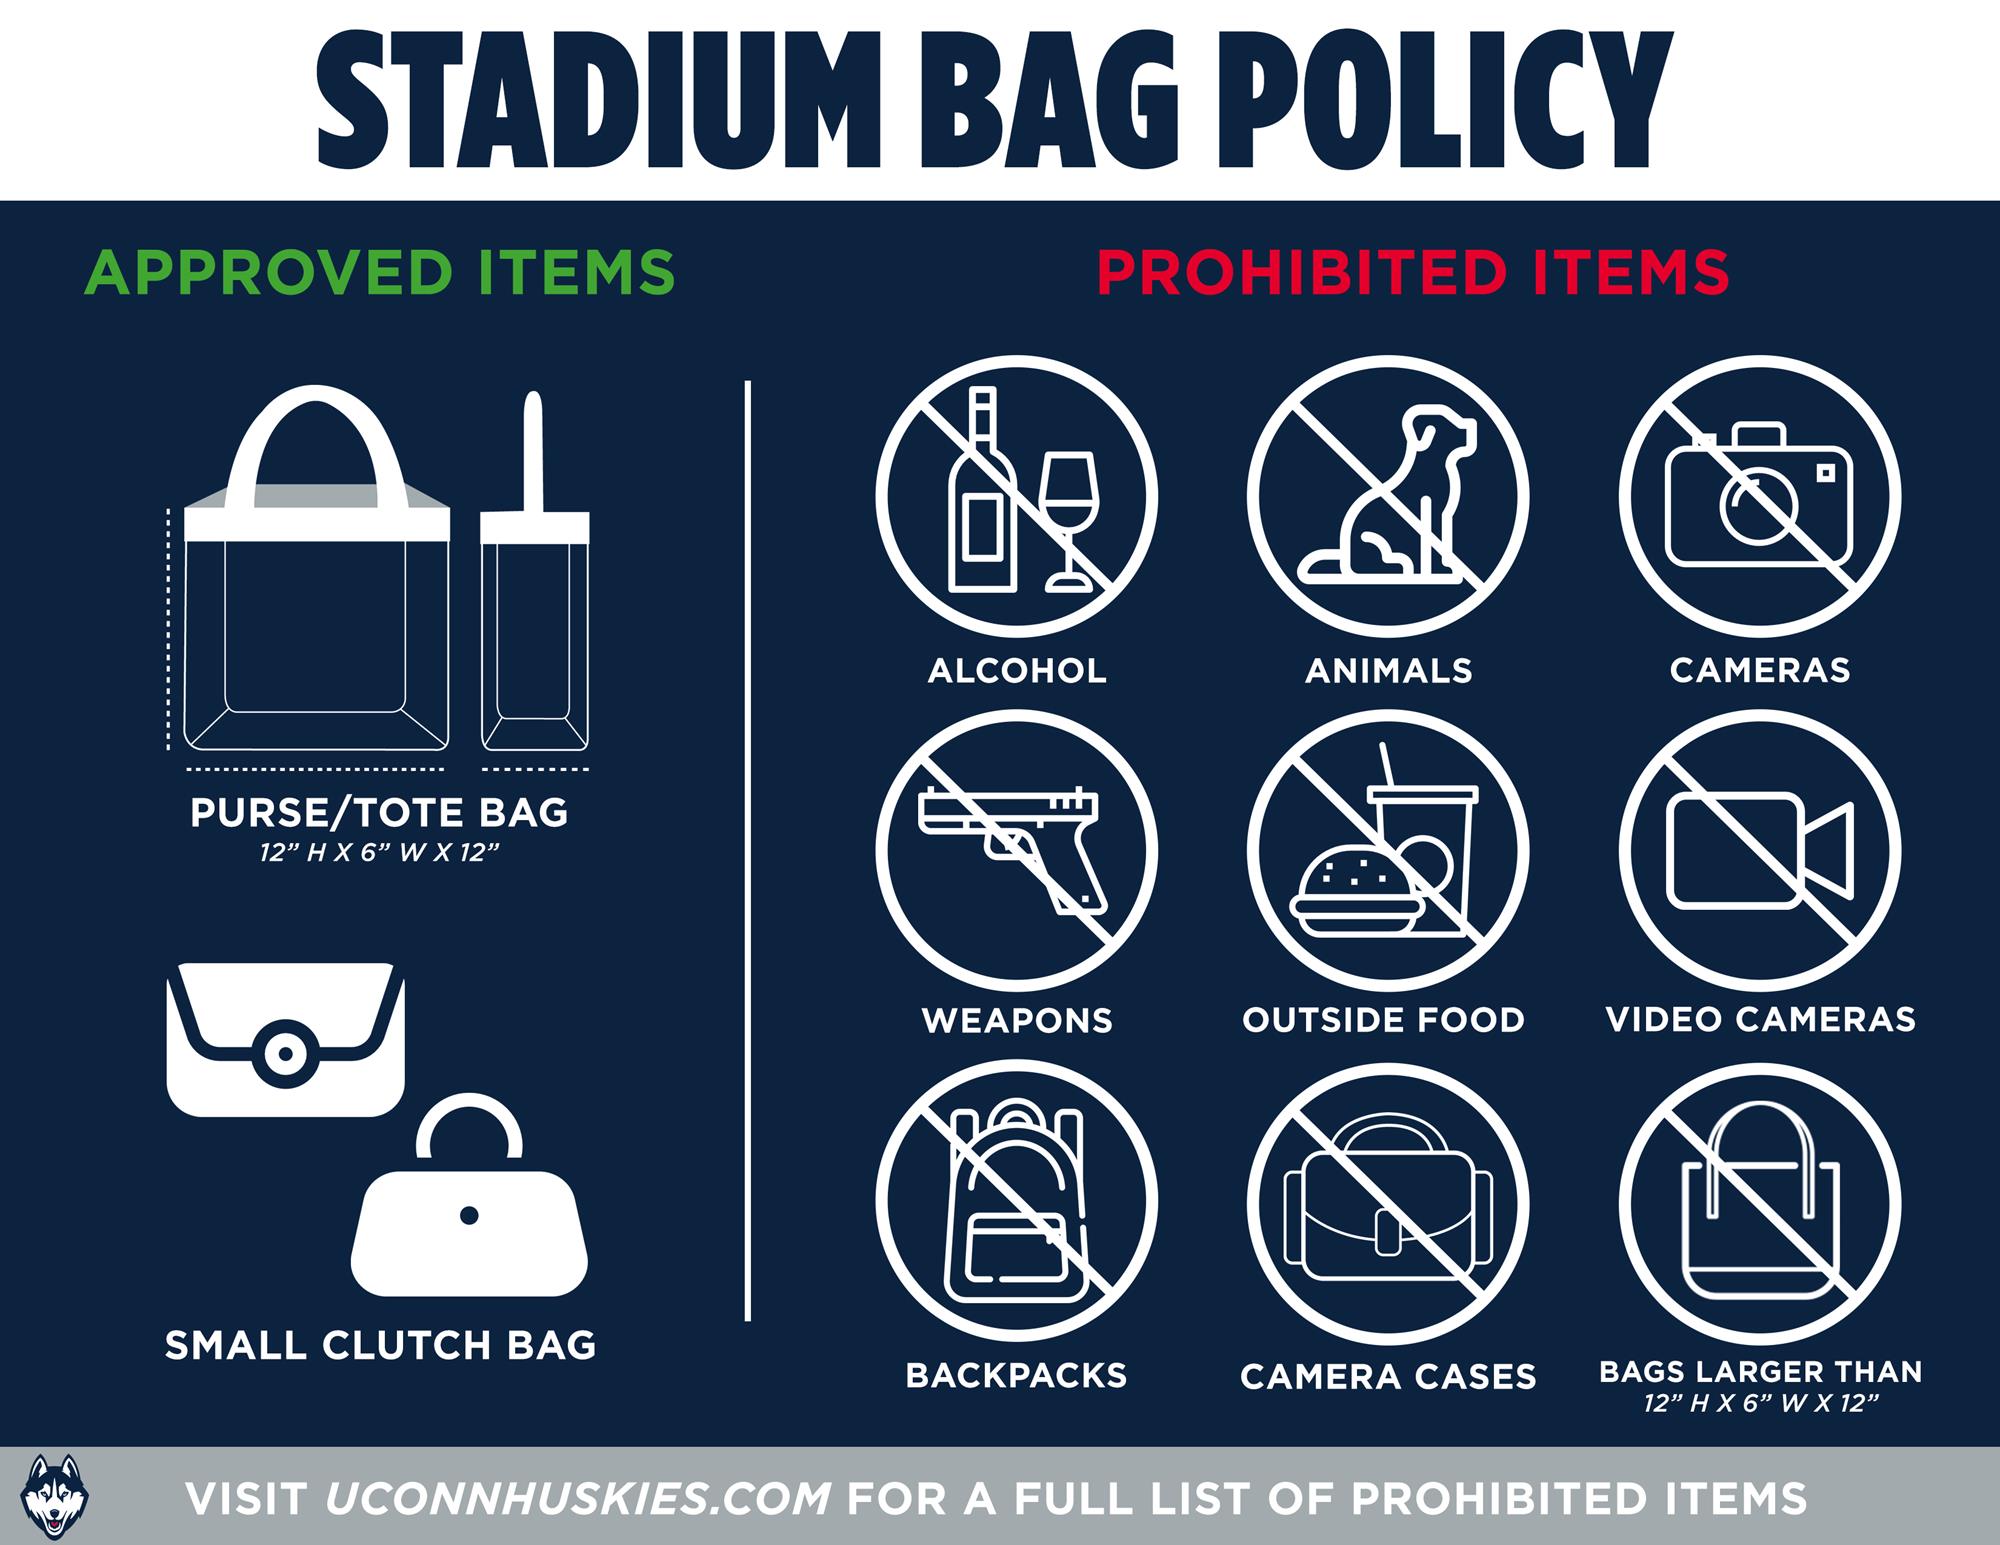 New bag policy for Patriots games